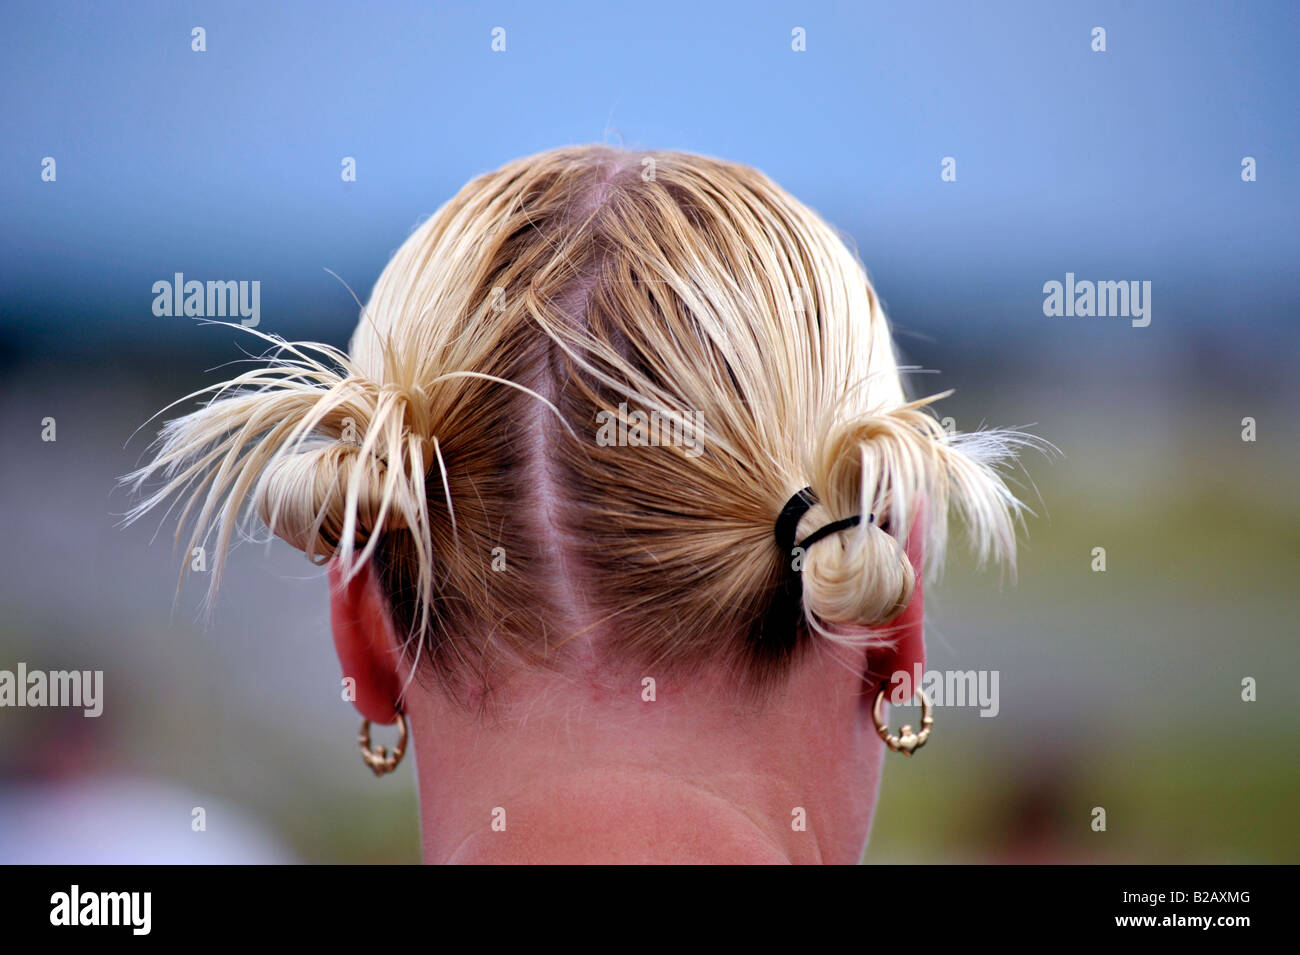 women head with hair bunches Stock Photo